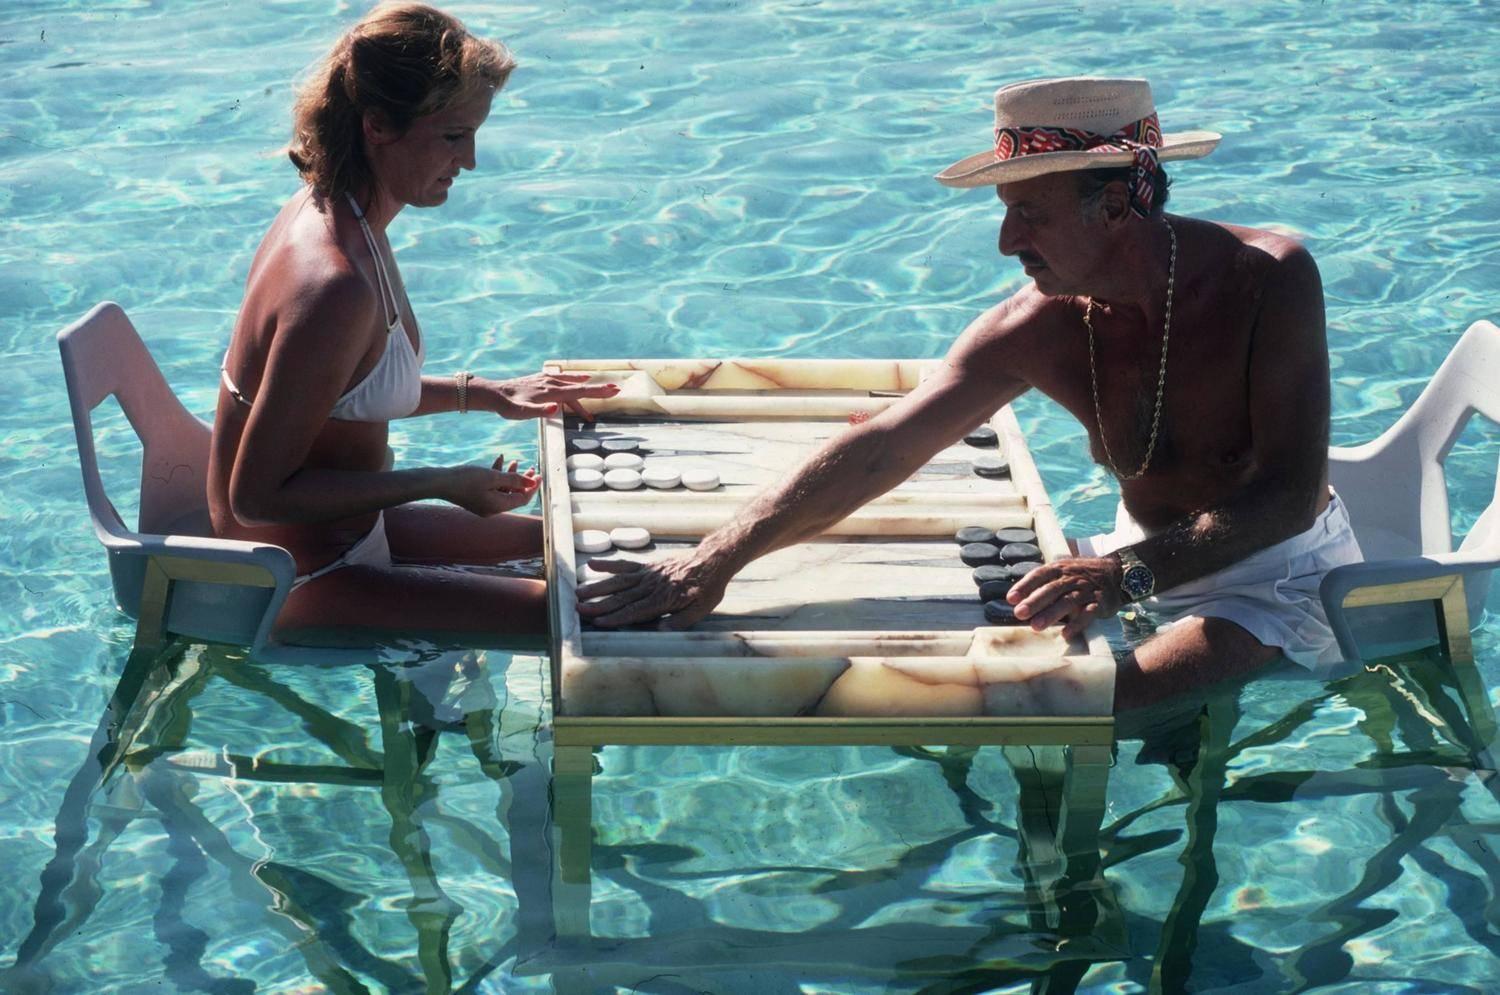 Keep Your Cool (Backgammon in Acapulco) (Slim Aarons Estate Edition)